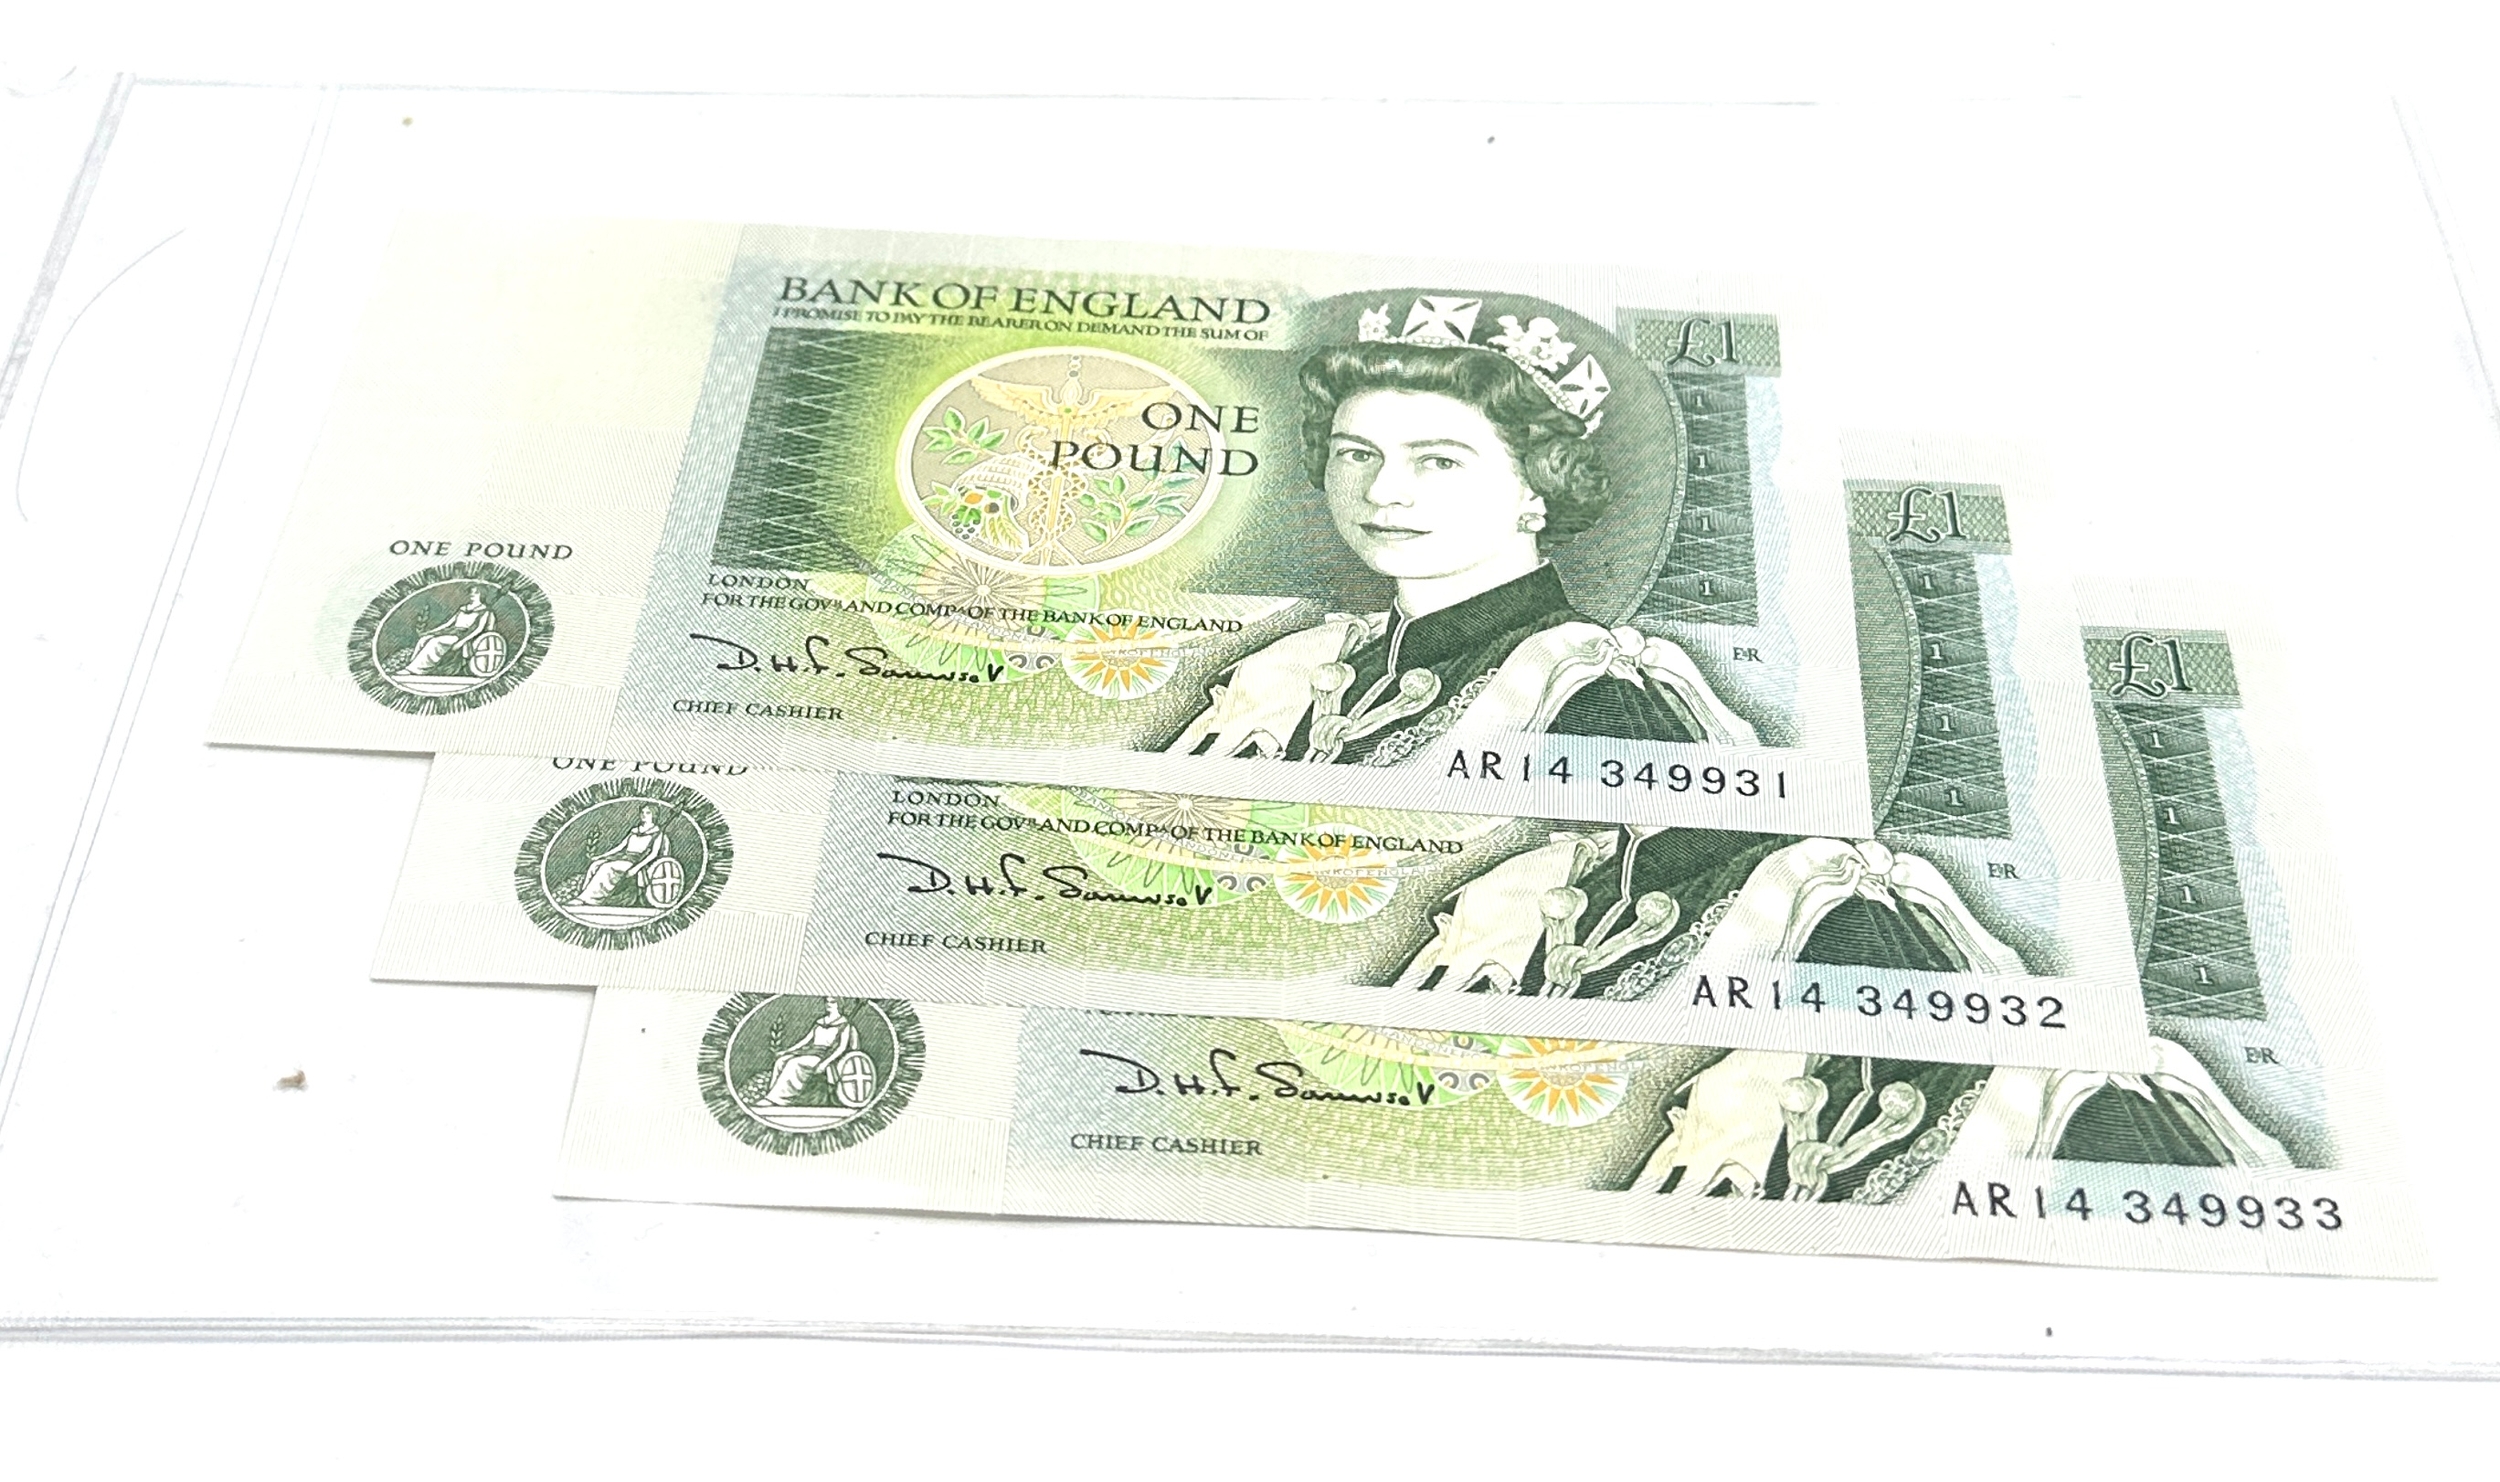 3 consecutive AR14 One Pound £1 bank notes - D H F Somerset - UNC